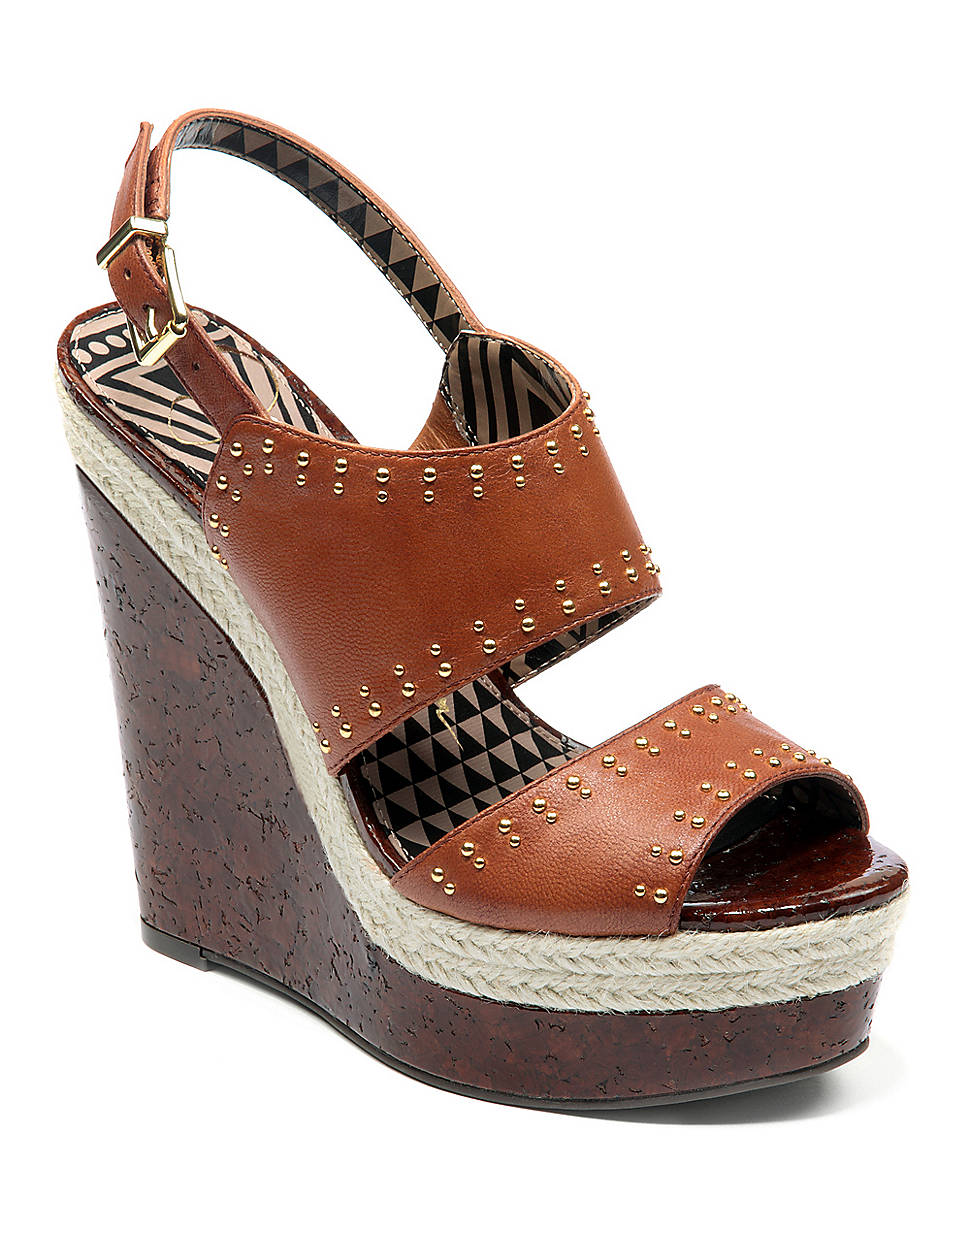 Jessica Simpson Geno Leather Wedges With Studded Accents in Brown ...